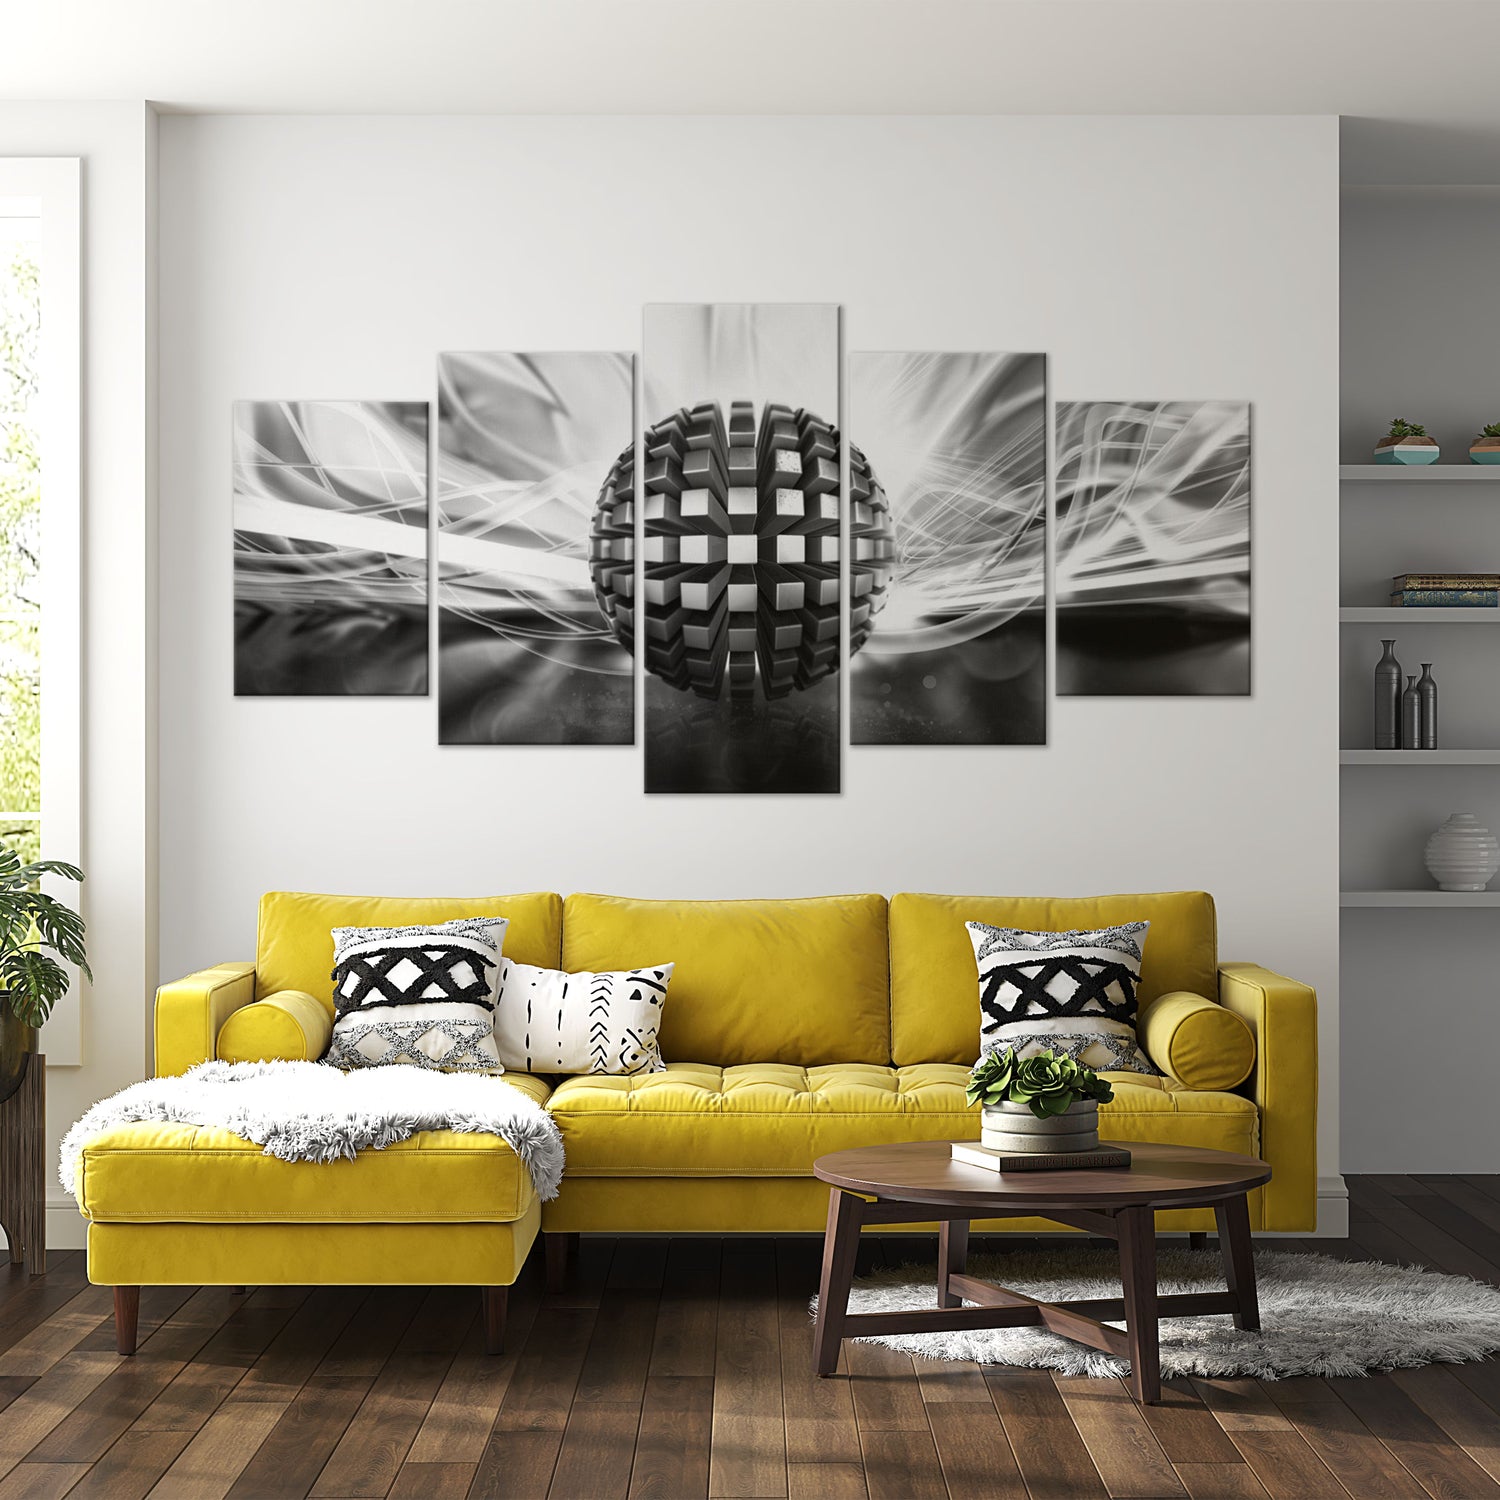 Abstract Canvas Wall Art - Metal Ball - 5 Pieces